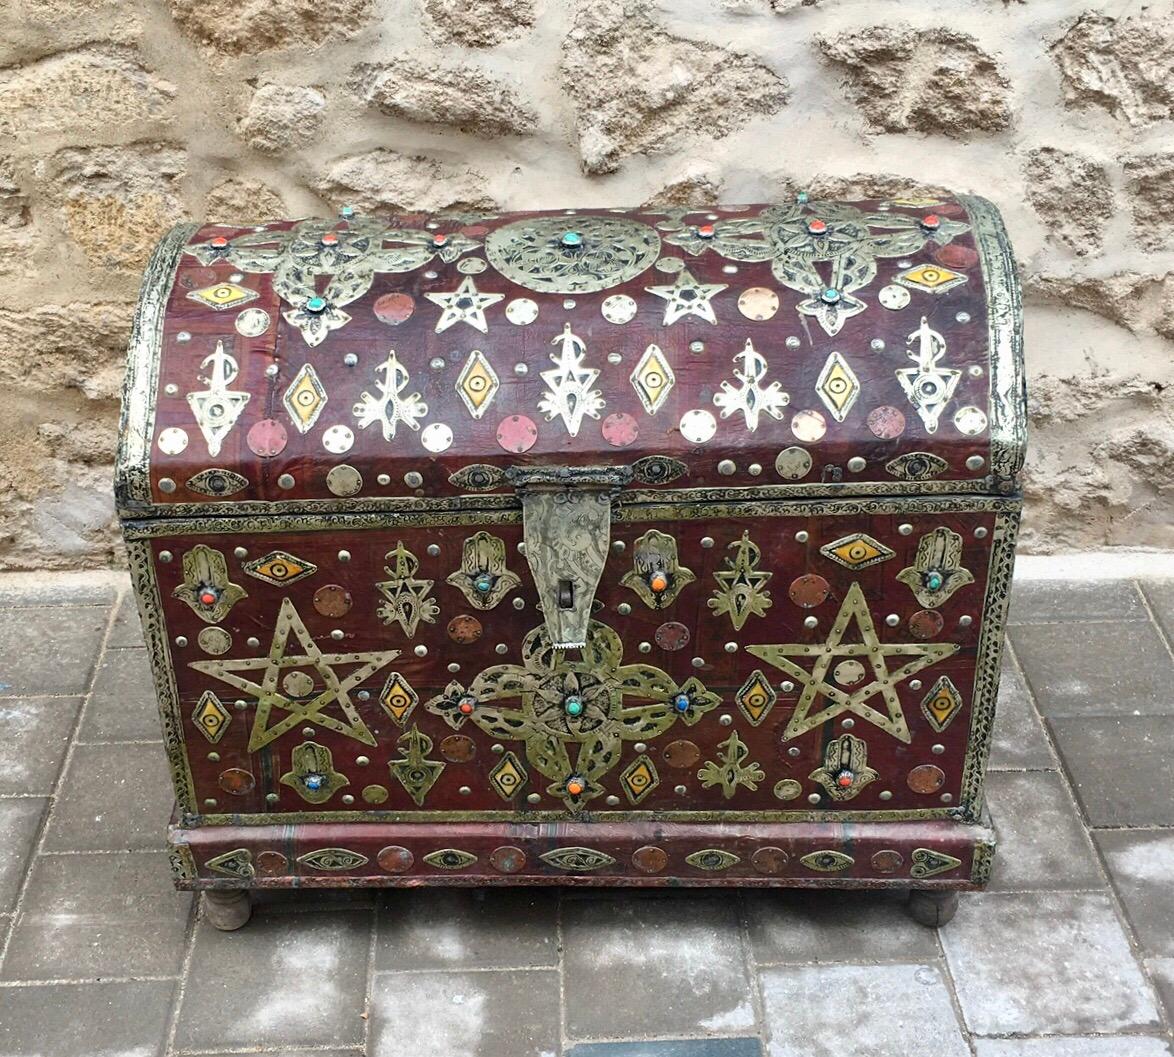 This antique dowry trunk was originally filled with Fine clothes, bedding, and jewelry, then presented by a husband to his future wife. Made in southern Morocco, the wood dates from the early 1800s and is tamarix (a type of cedar) covered in